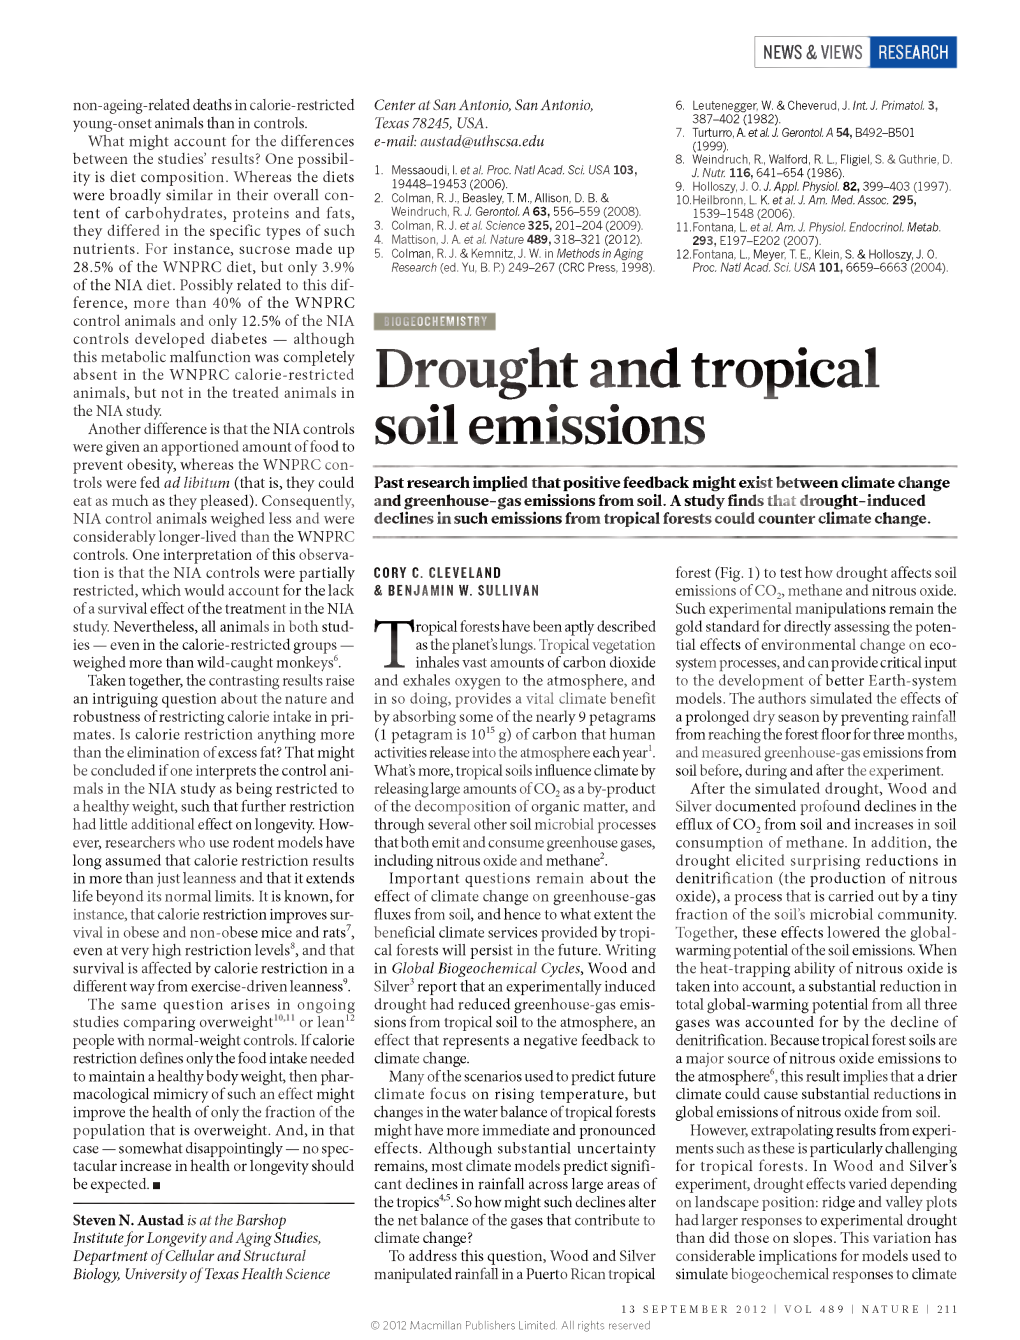 Drought and Tropical Soil Emissions